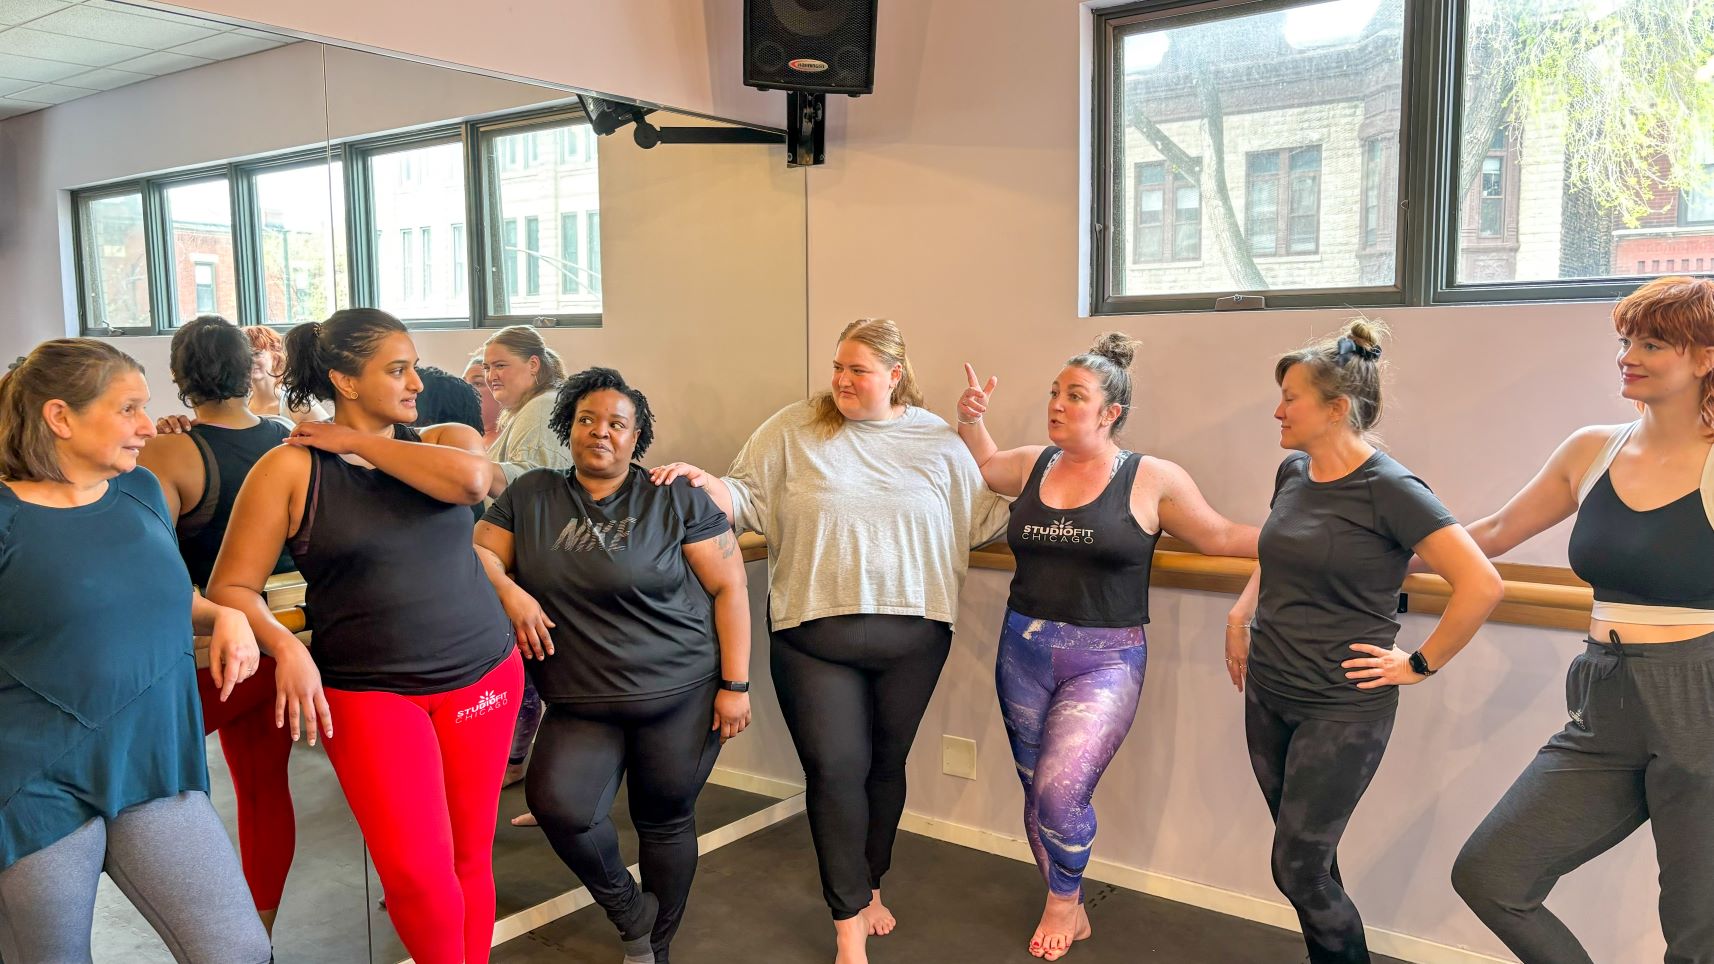 Women-Gathering-In-the-gym-at-studio-fit-chicago-about-to-work-out